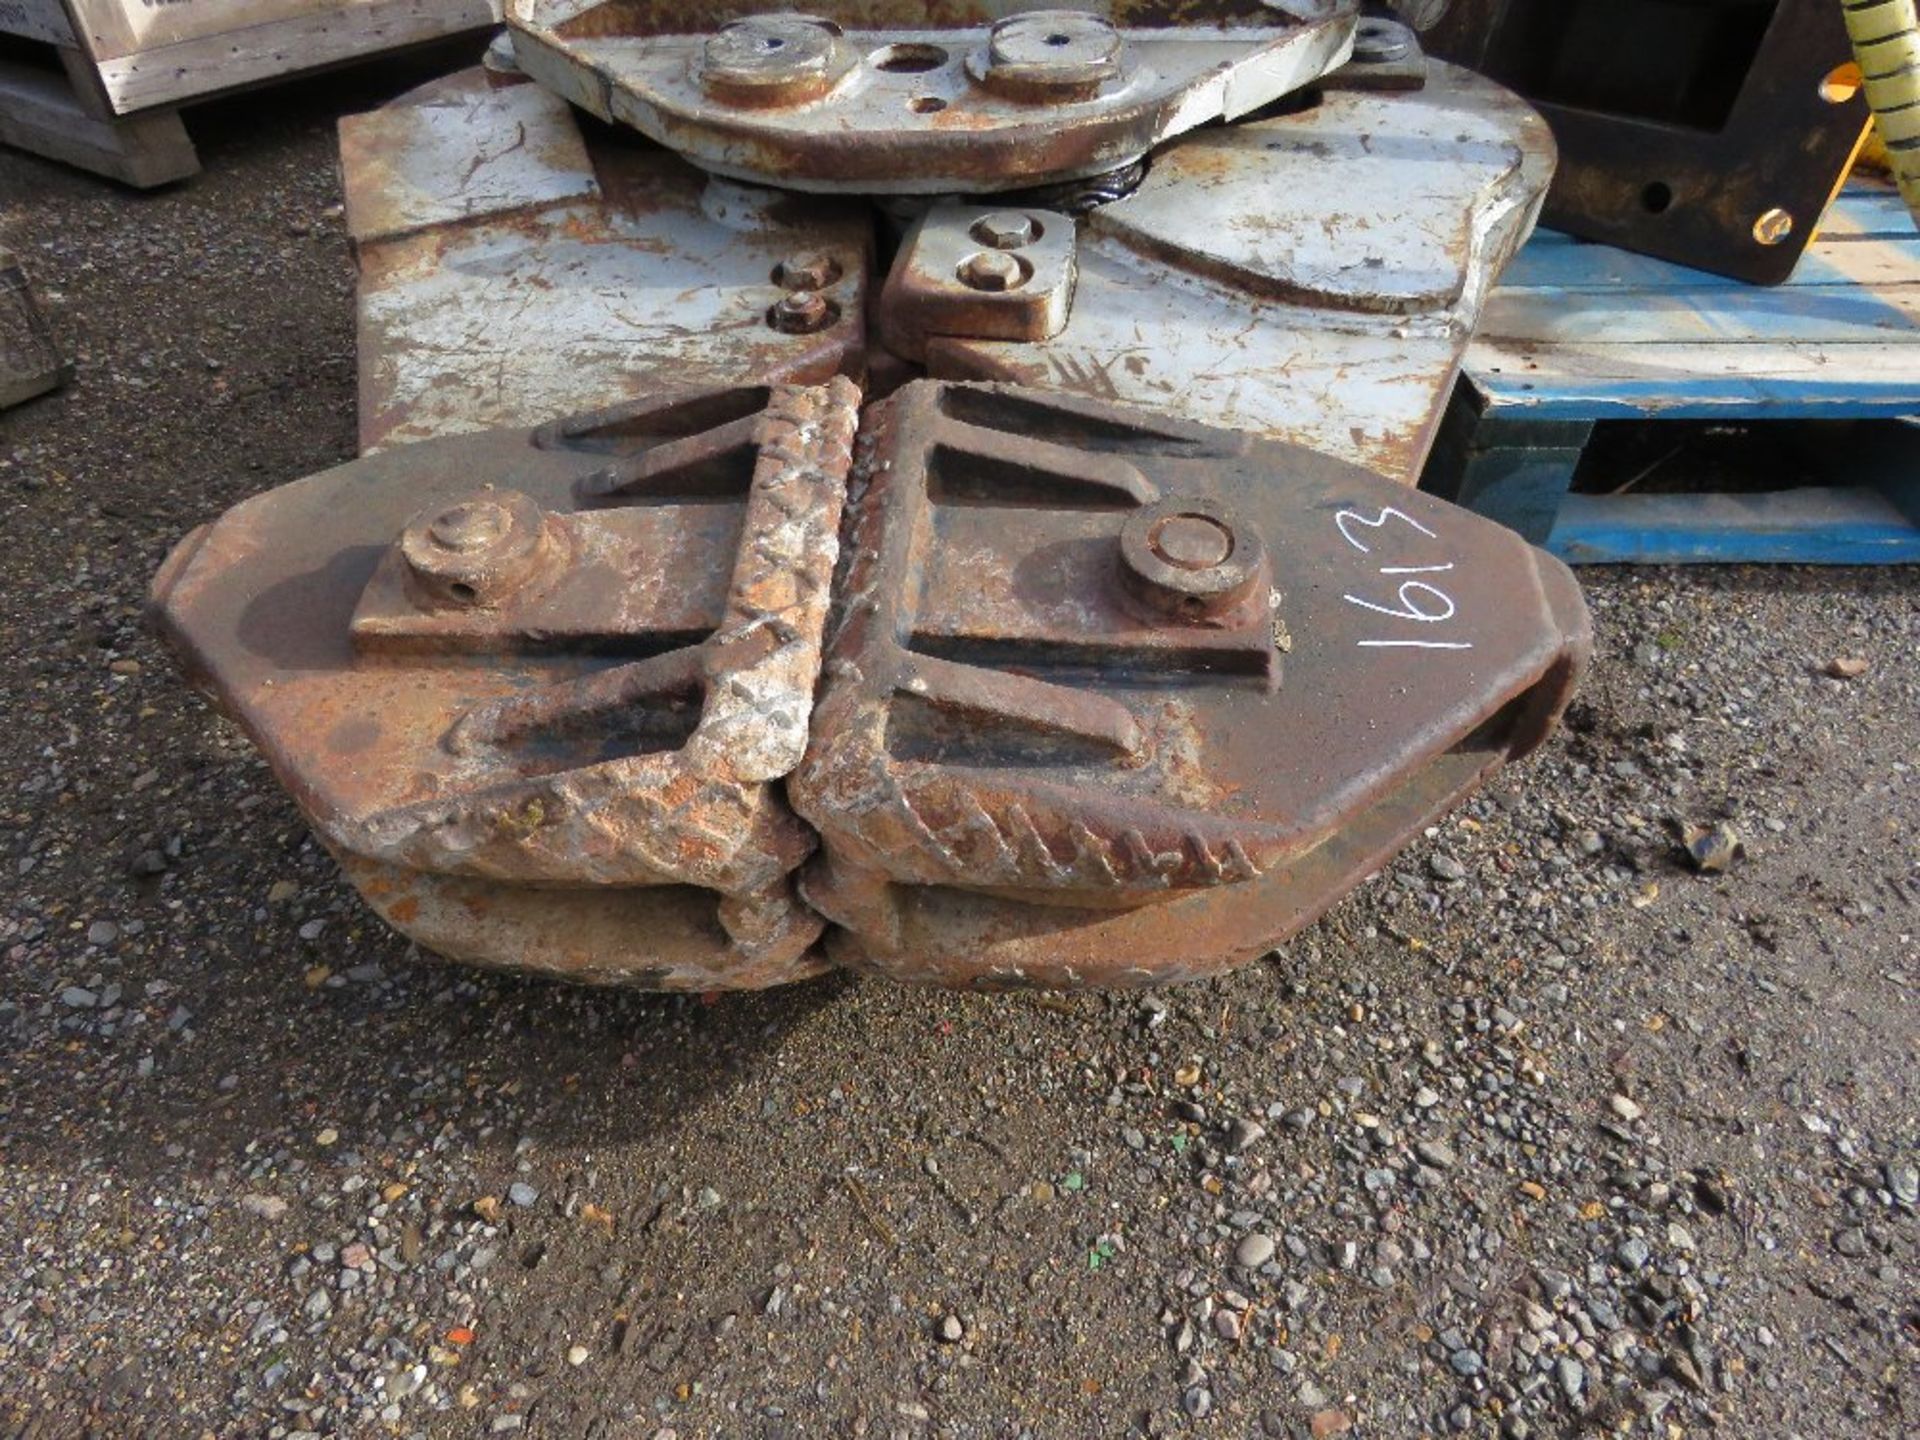 SET OF NPK S7X CRUSHER JAWS, EXCAVATOR MOUNTED ON 65MM PINS. - Image 3 of 9